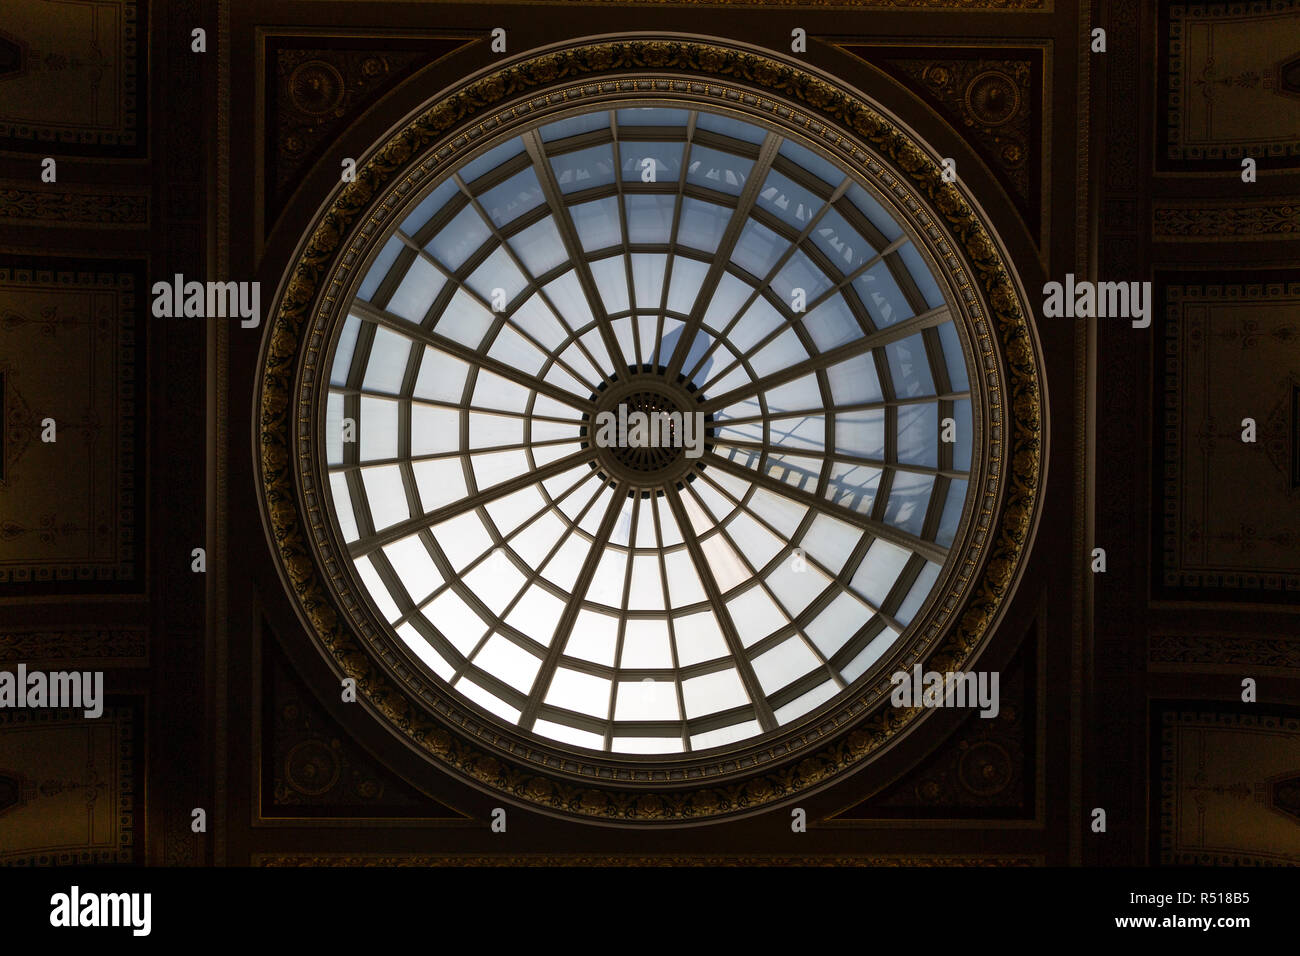 Dome of the National Gallery from the inside in London, England, United Kingdom Stock Photo